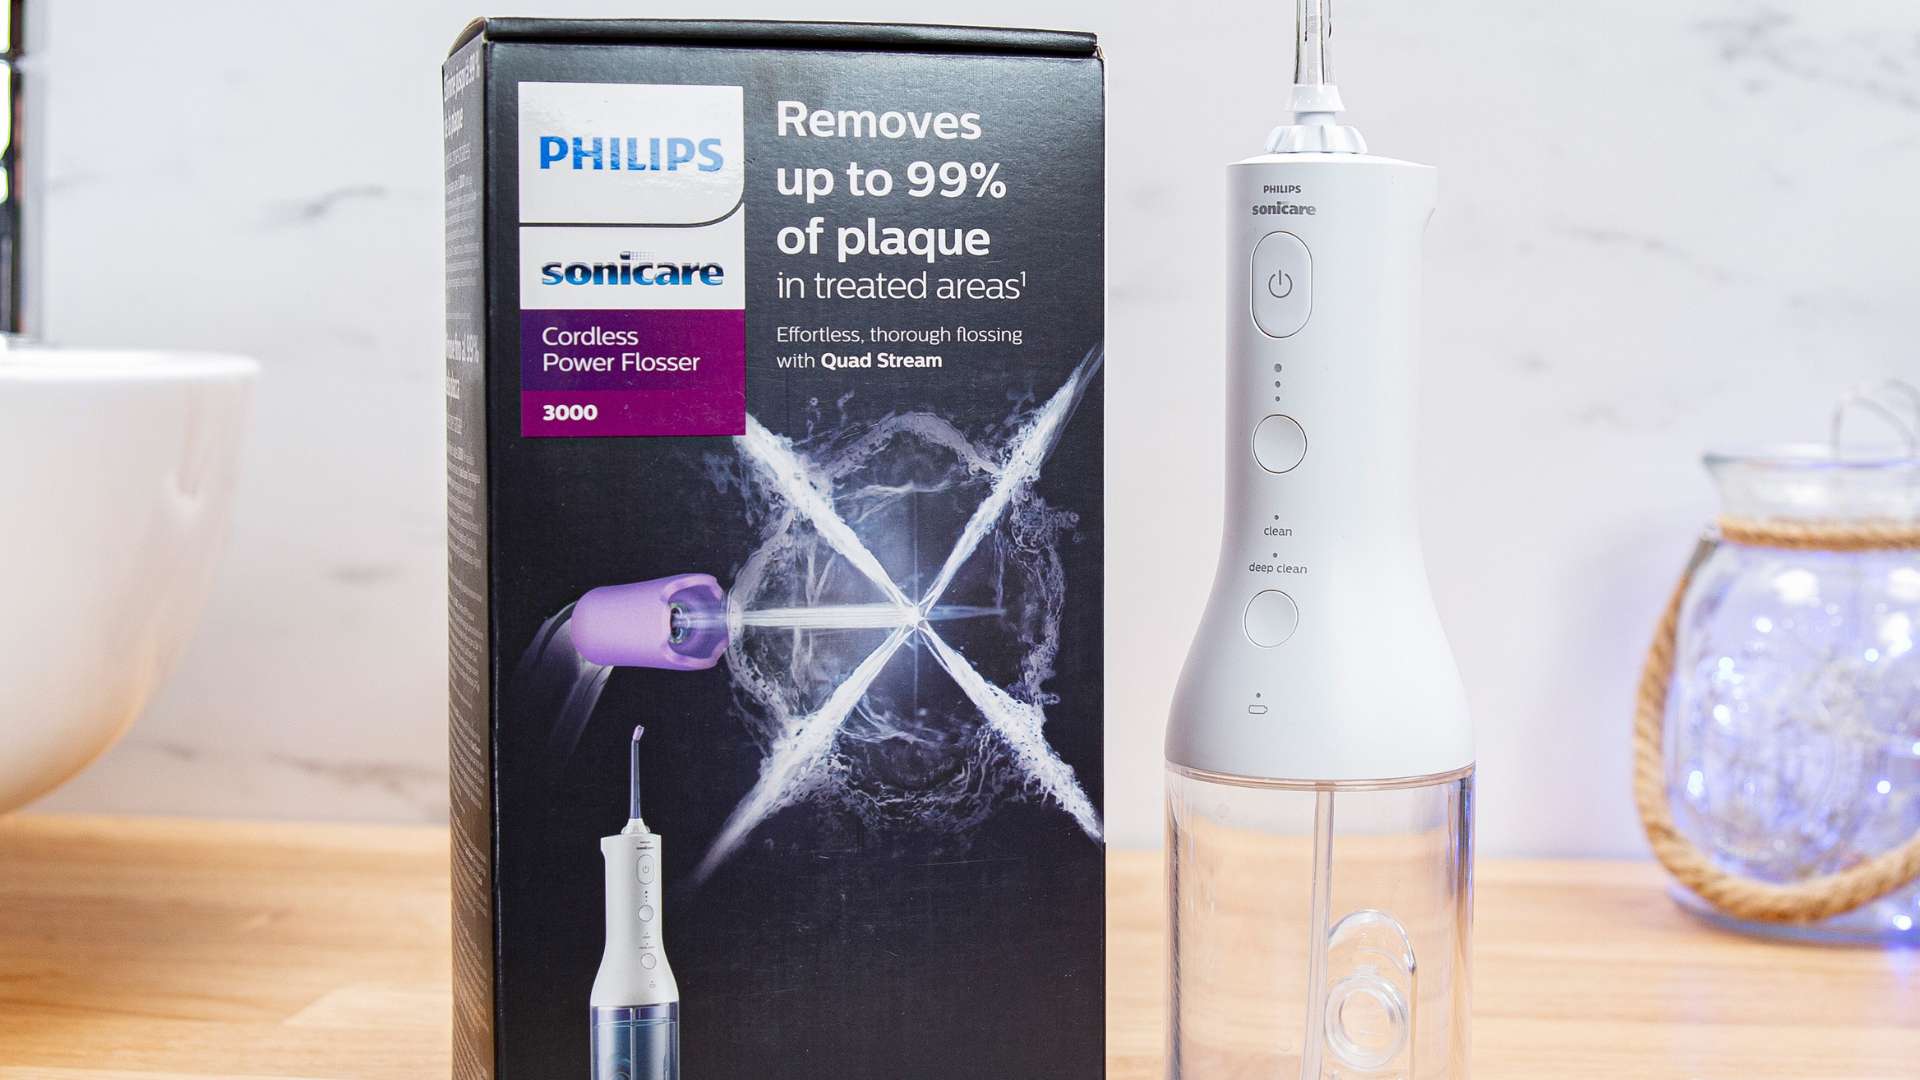 Philips Sonicare Cordless Power Flosser 3000 review 67